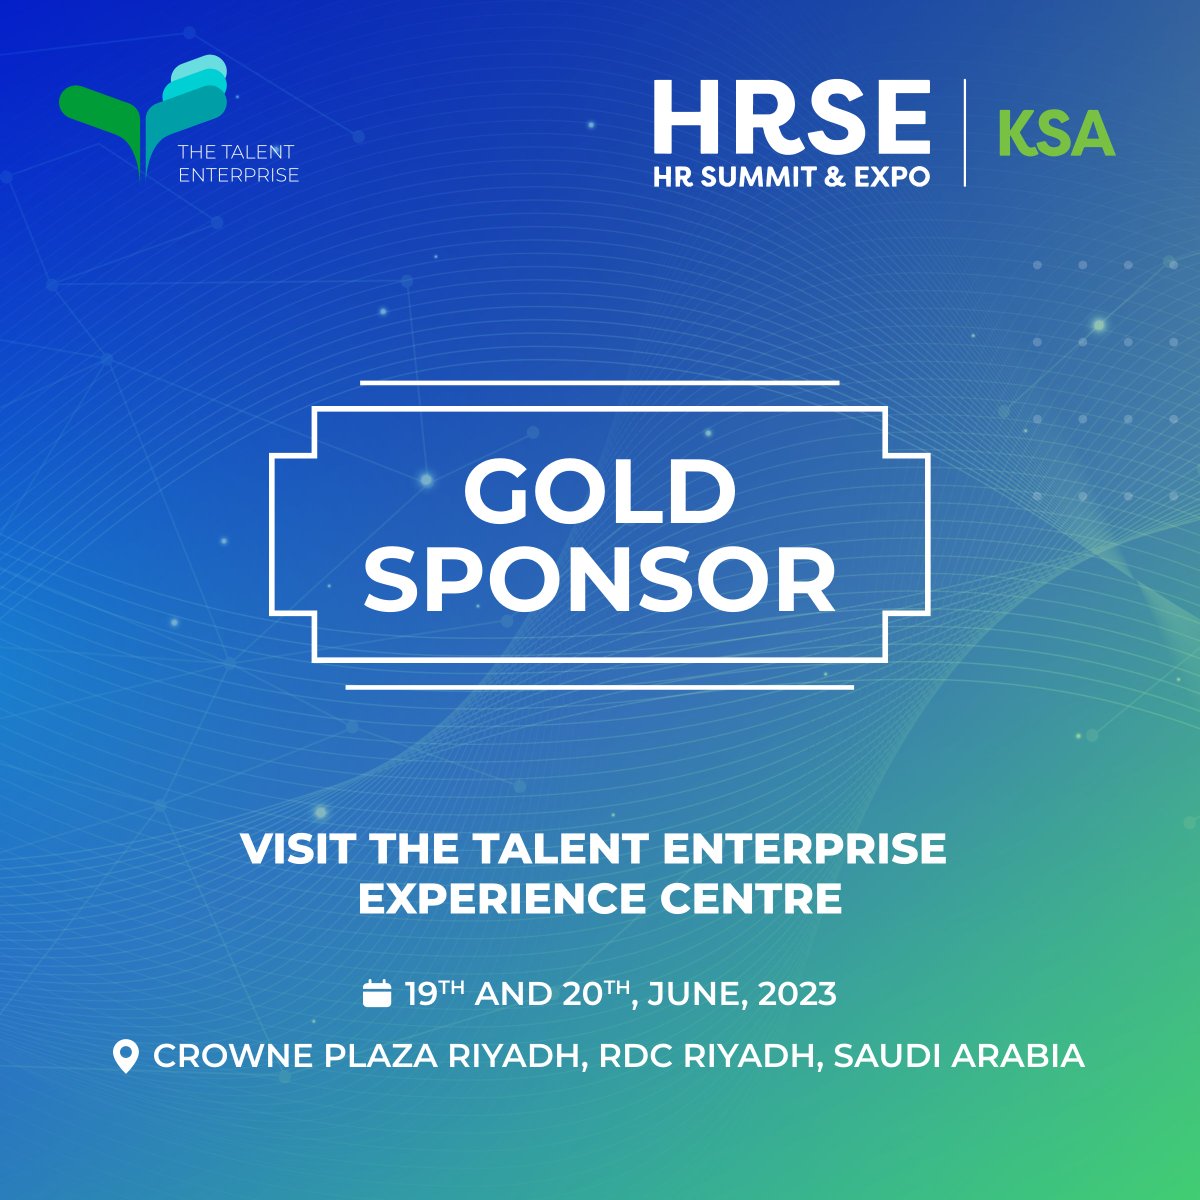 The Talent Enterprise is a Gold Sponsor at the HRSE Riyadh, on the 19th - 20th of June, 2023, at the Crowne Plaza Riyadh, RDC, Saudi Arabia. Visit The Talent Enterprise Experience Centre at Booth B24. 

#HRSEKSA #Thetalententerprise #HRTech #FutureTalent